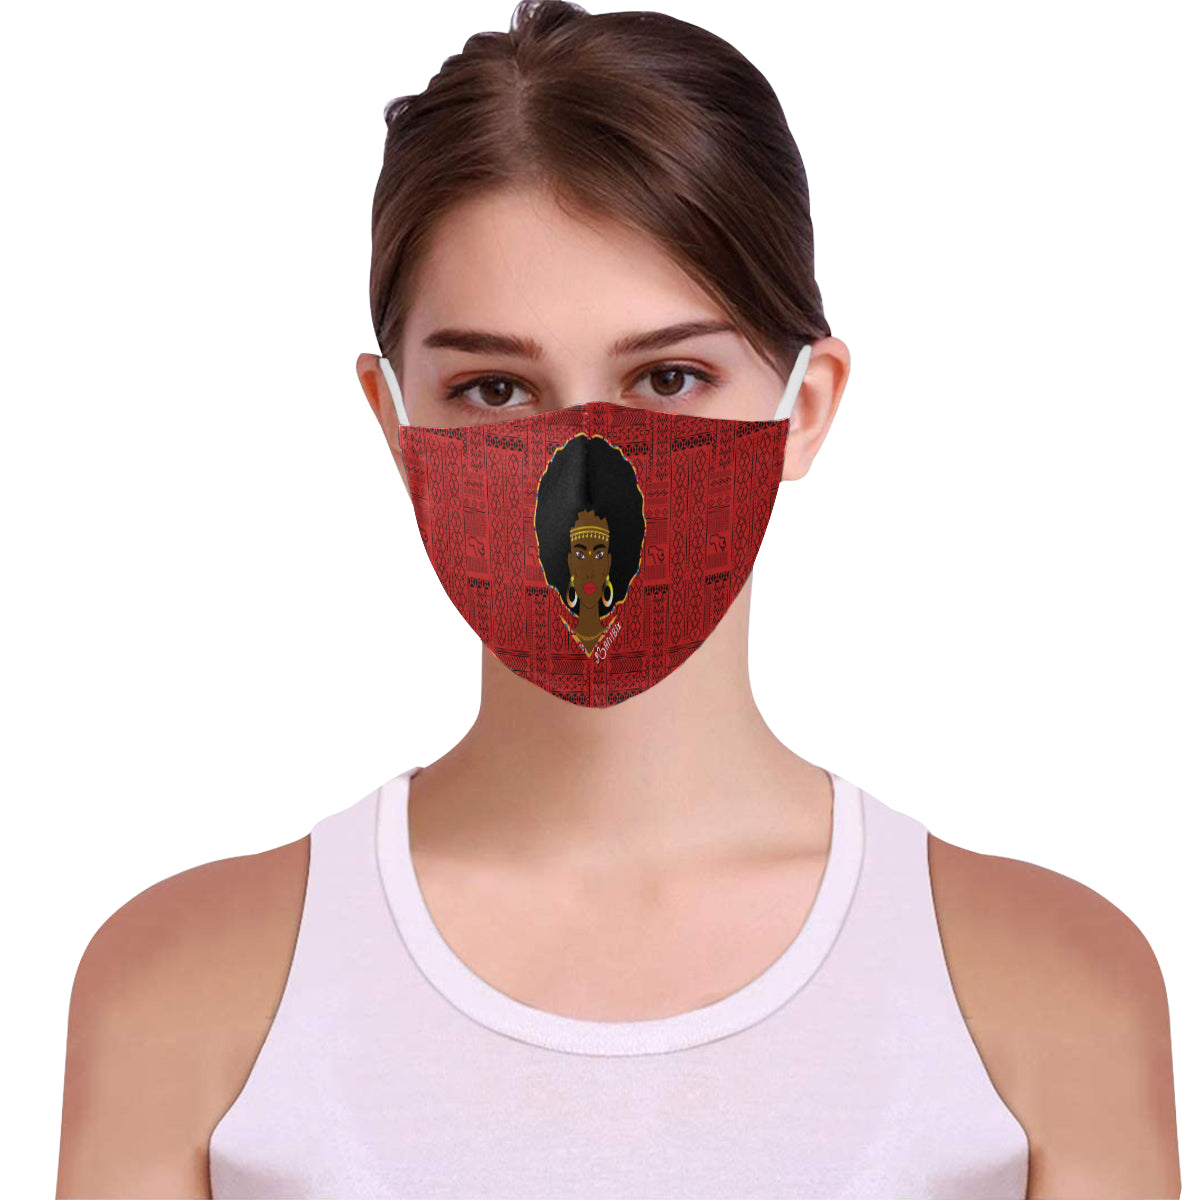 AfriBix Warrior Queen Cotton Fabric Face Mask with Filter Slot & Adjustable Strap (Pack of 5) - Non-medical use